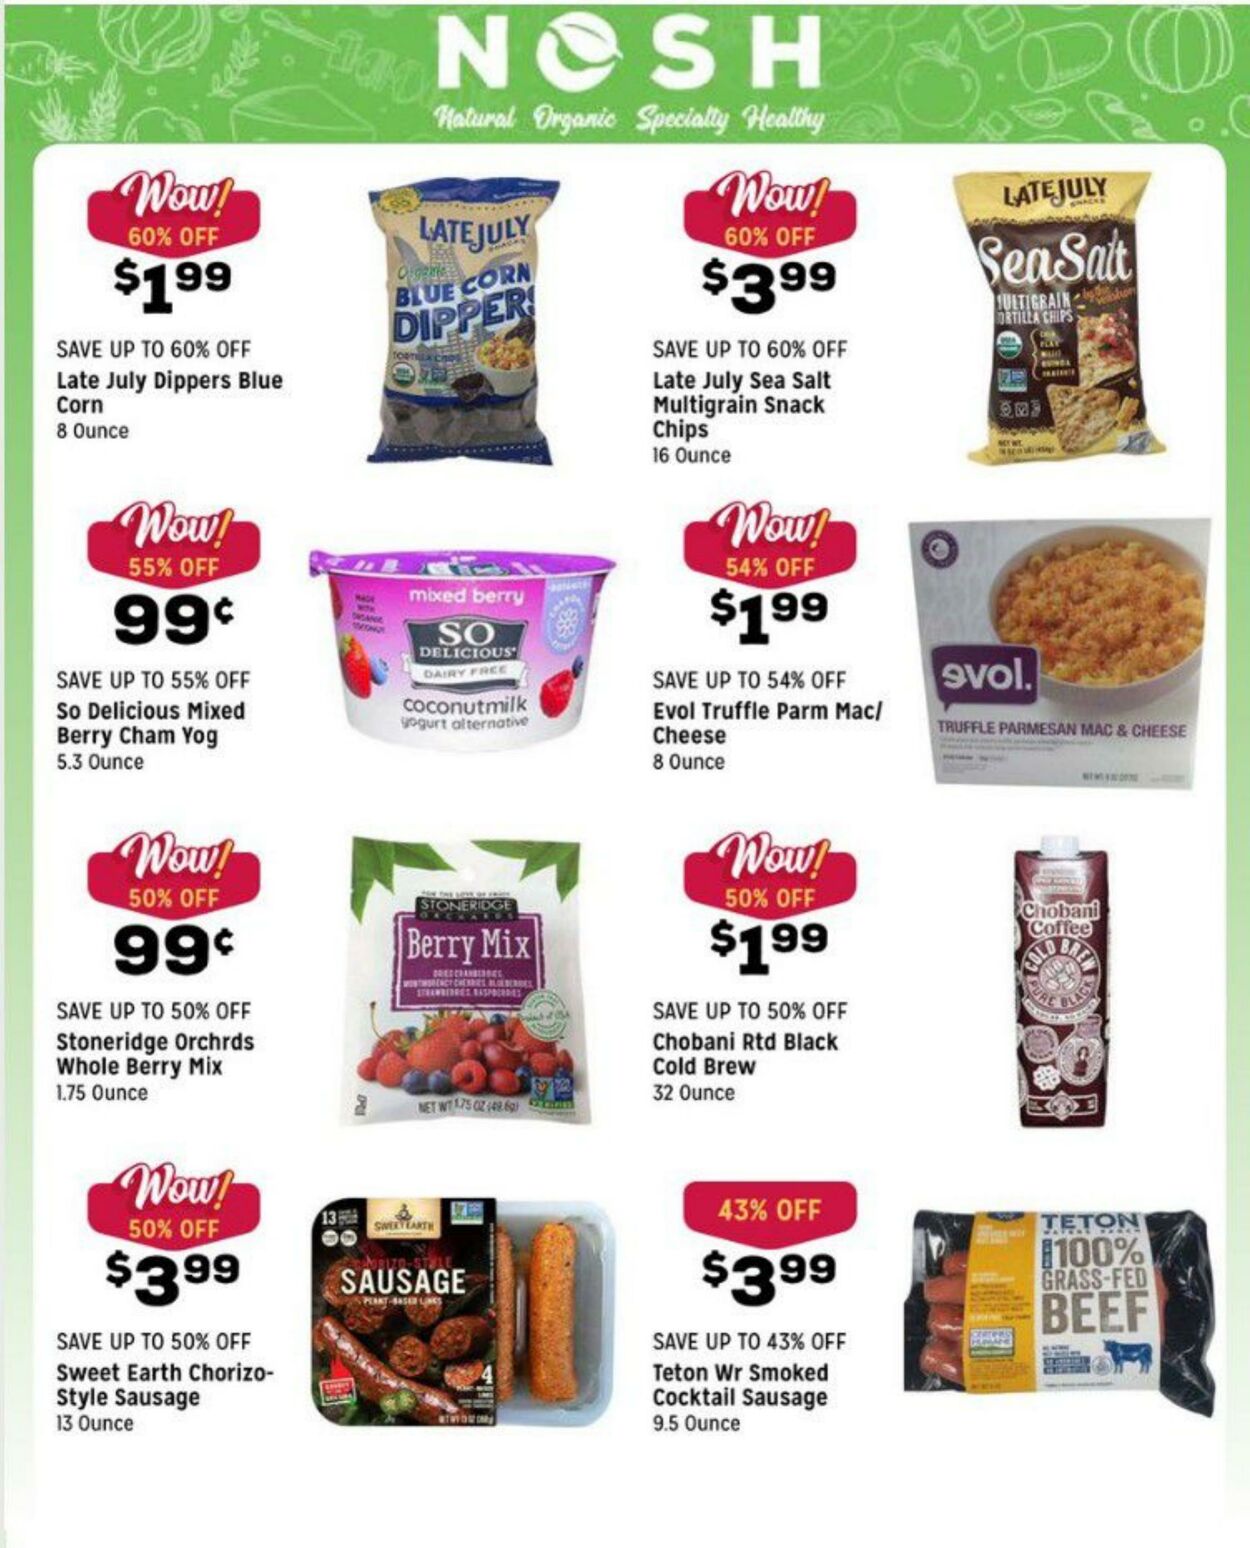 Weekly ad Grocery Outlet 05/18/2022 - 05/24/2022